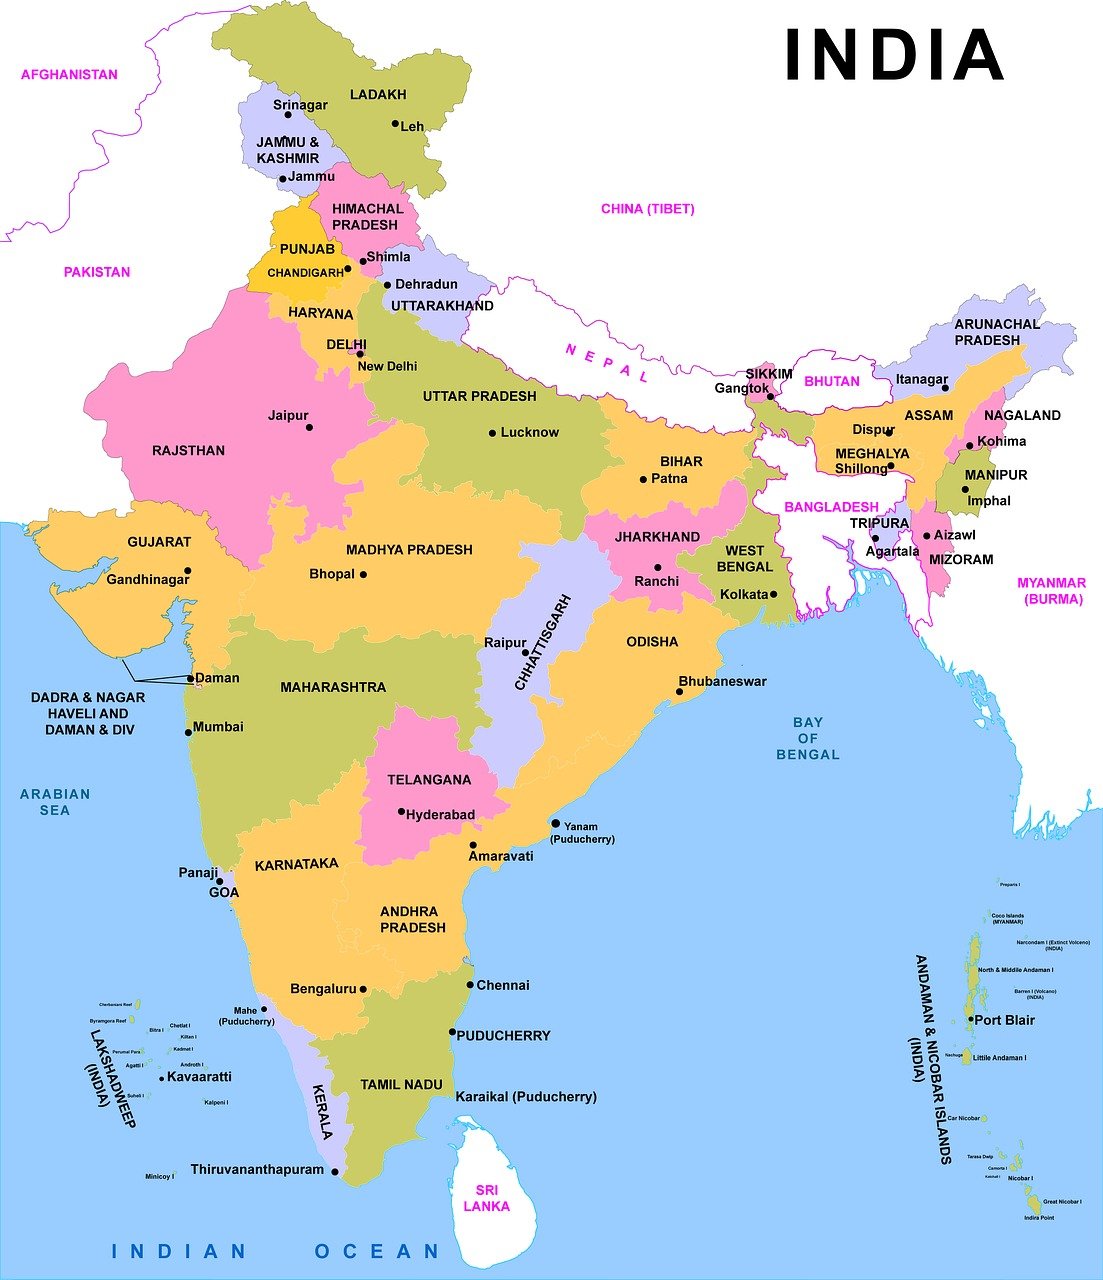 The largest states of India